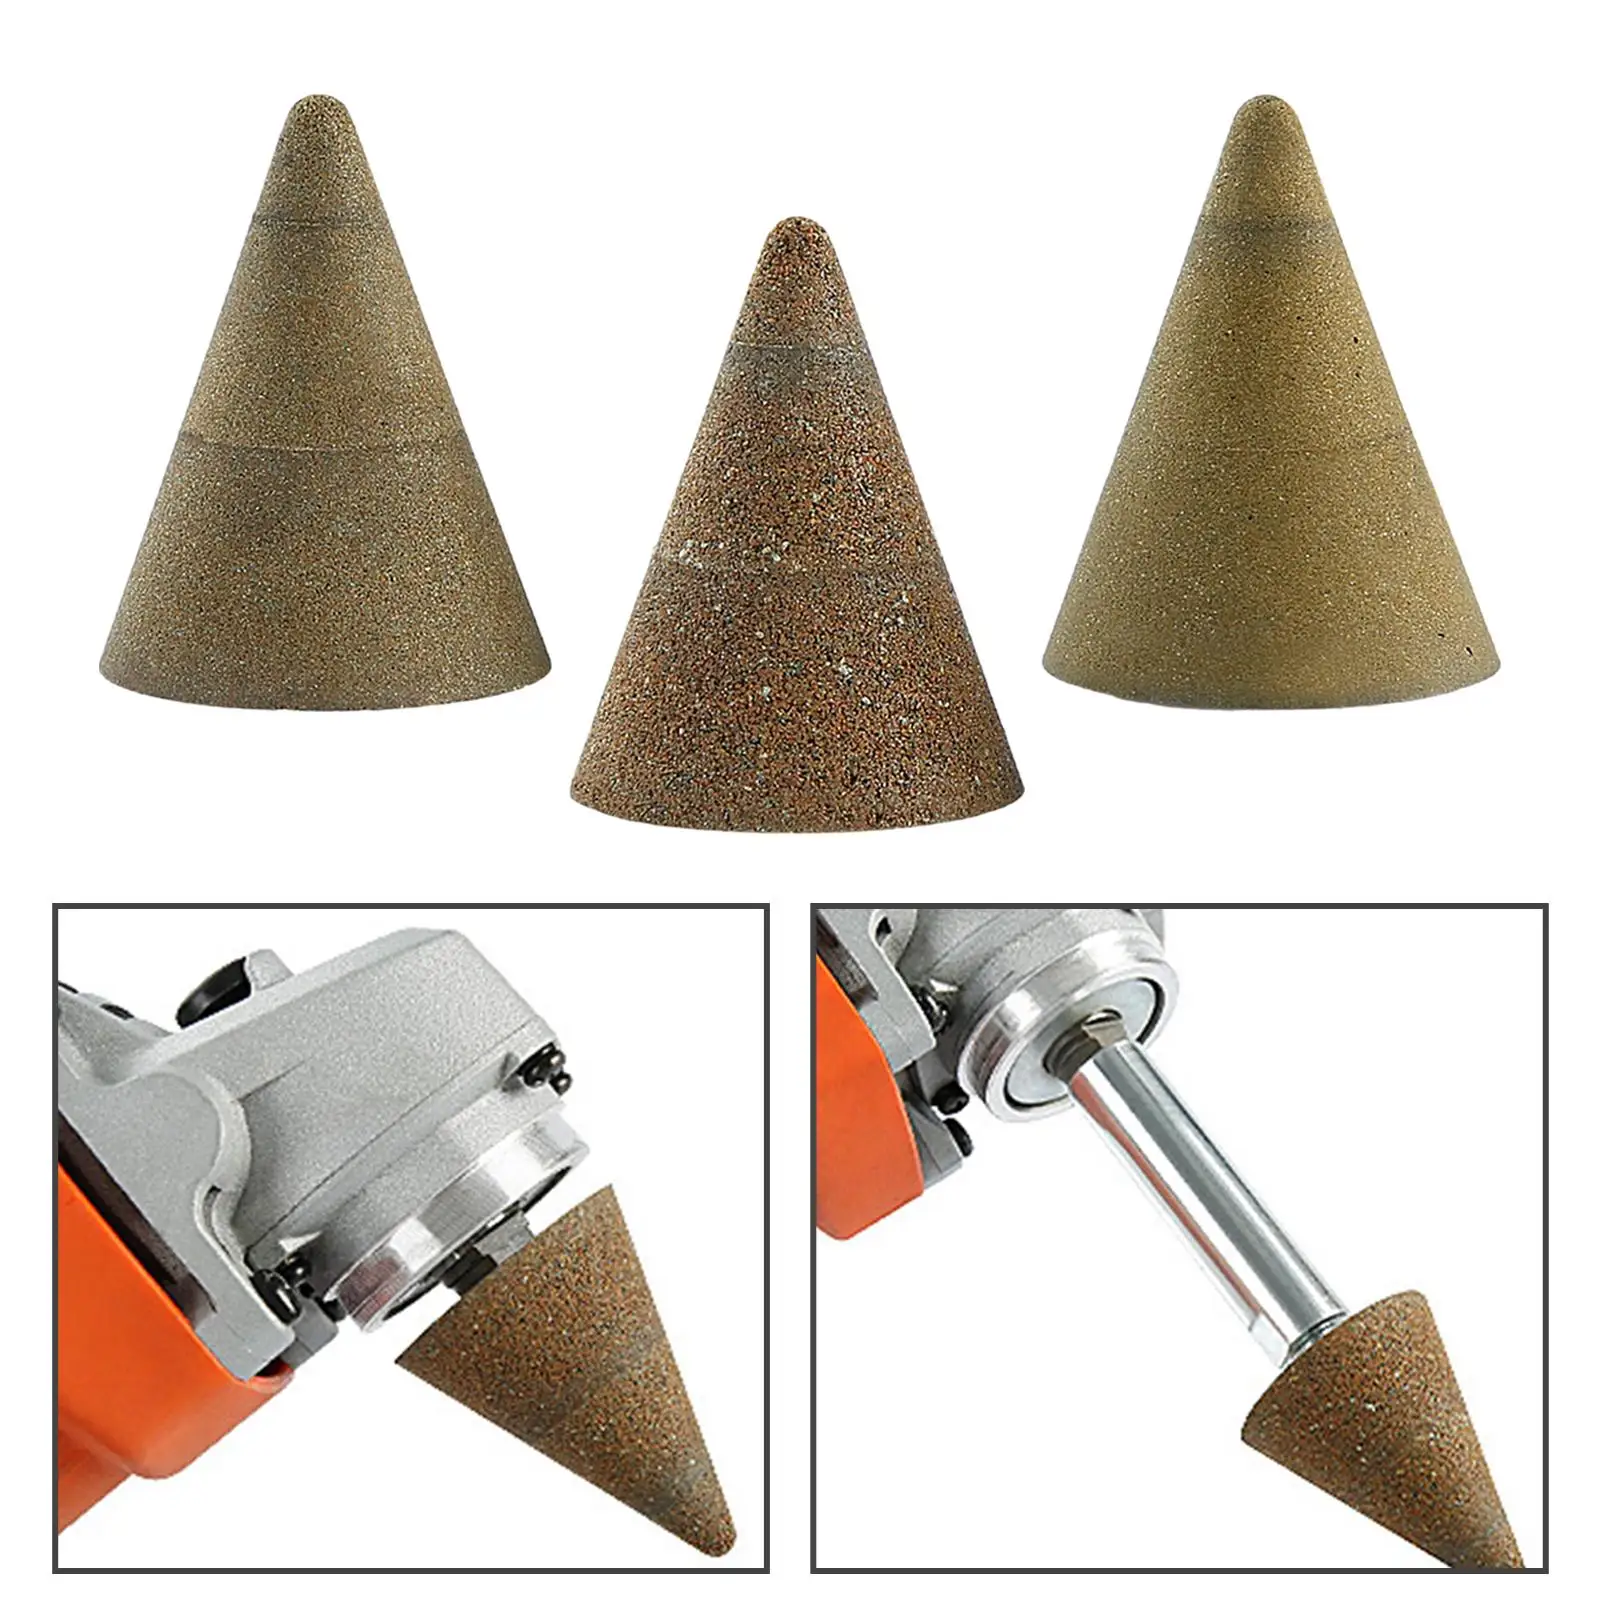 3Pcs Grinder Stone Polishing Attachments Woodworking M10 Thread Portable Metal Working Power Step Drill Accessories Millstone